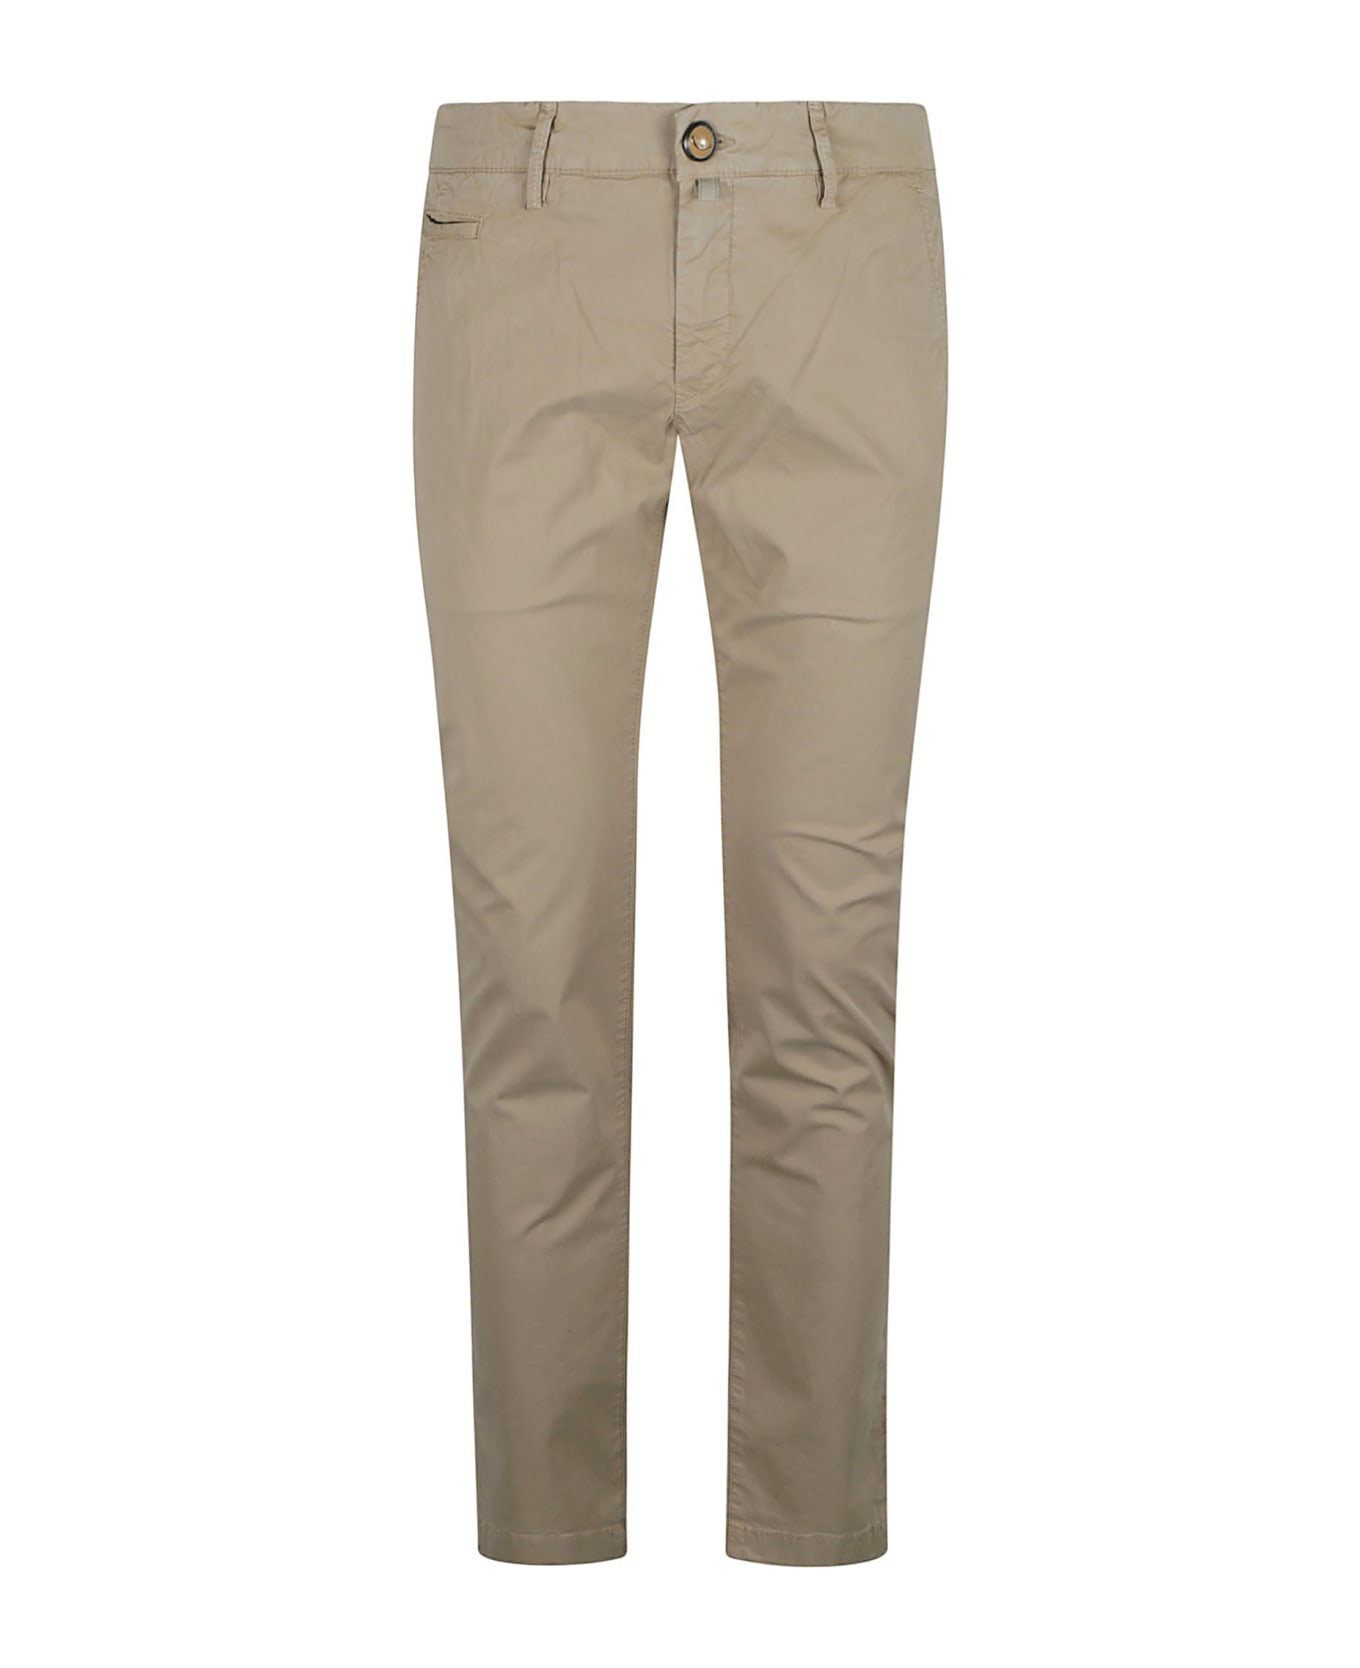 Jacob Cohen Button Fitted Ladies Trousers - Emp Beige